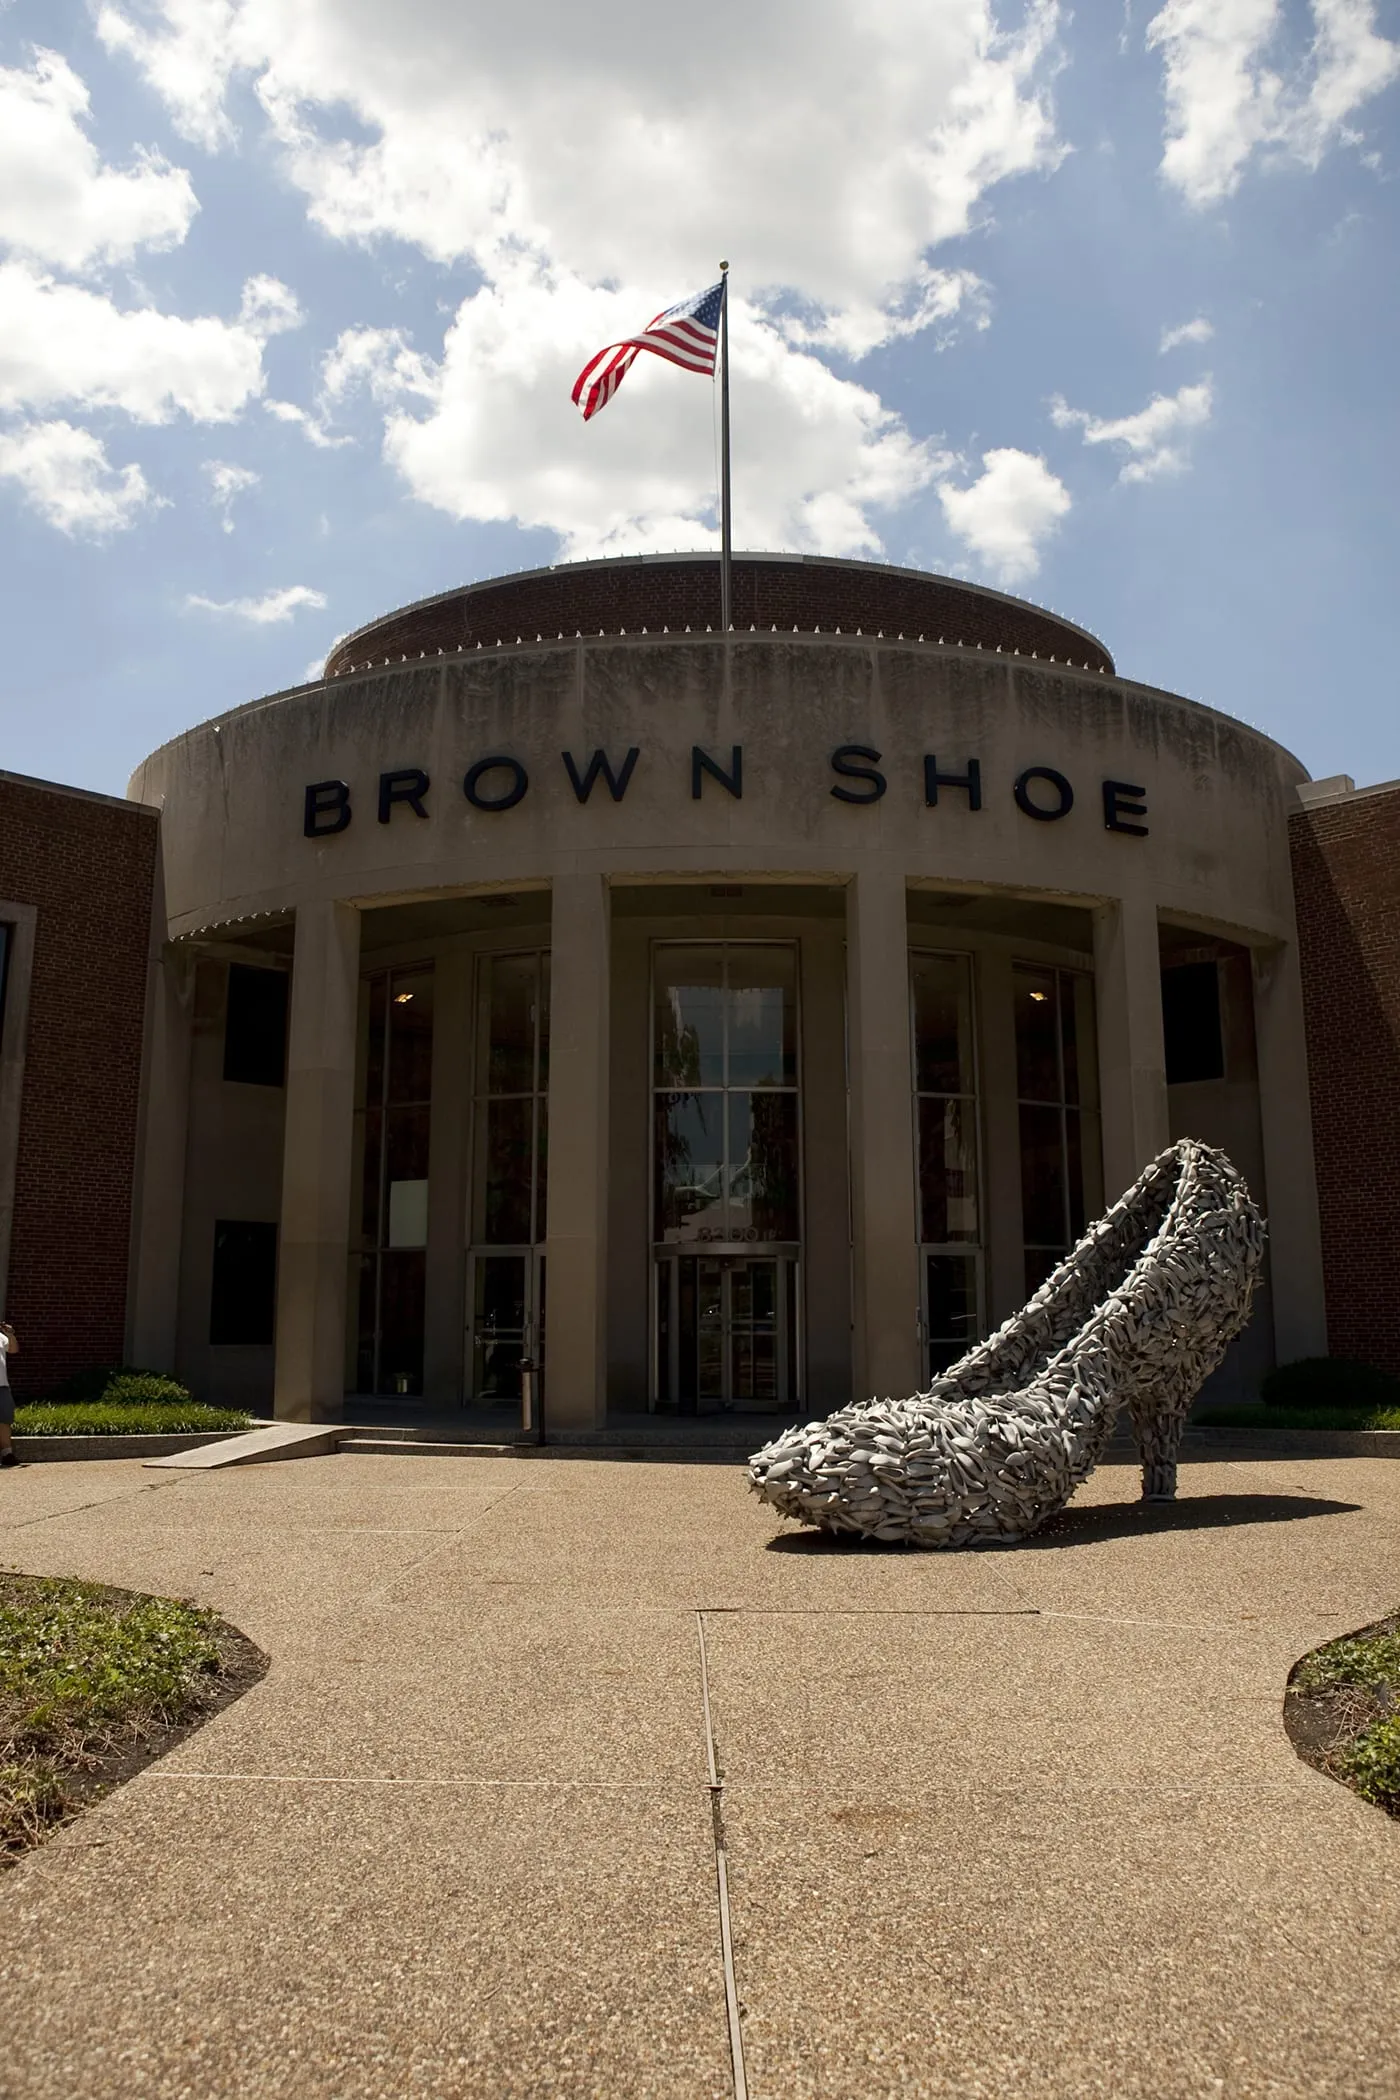 Big Shoe Made of Shoes in Clayton, Missouri